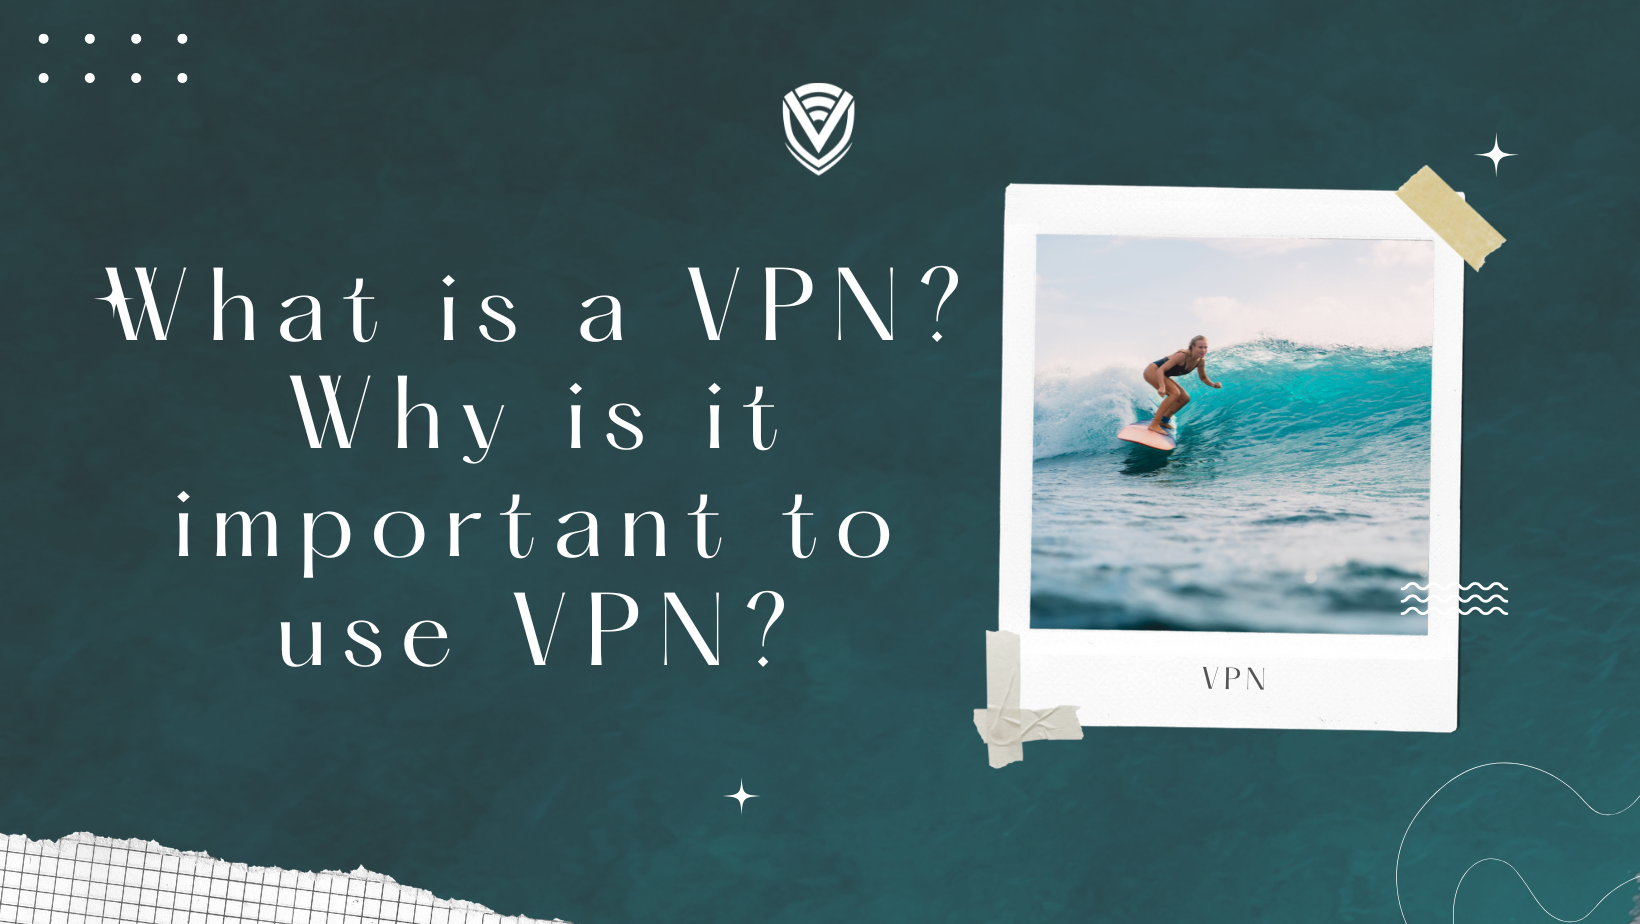 What is a VPN? Why is it important to use a VPN?